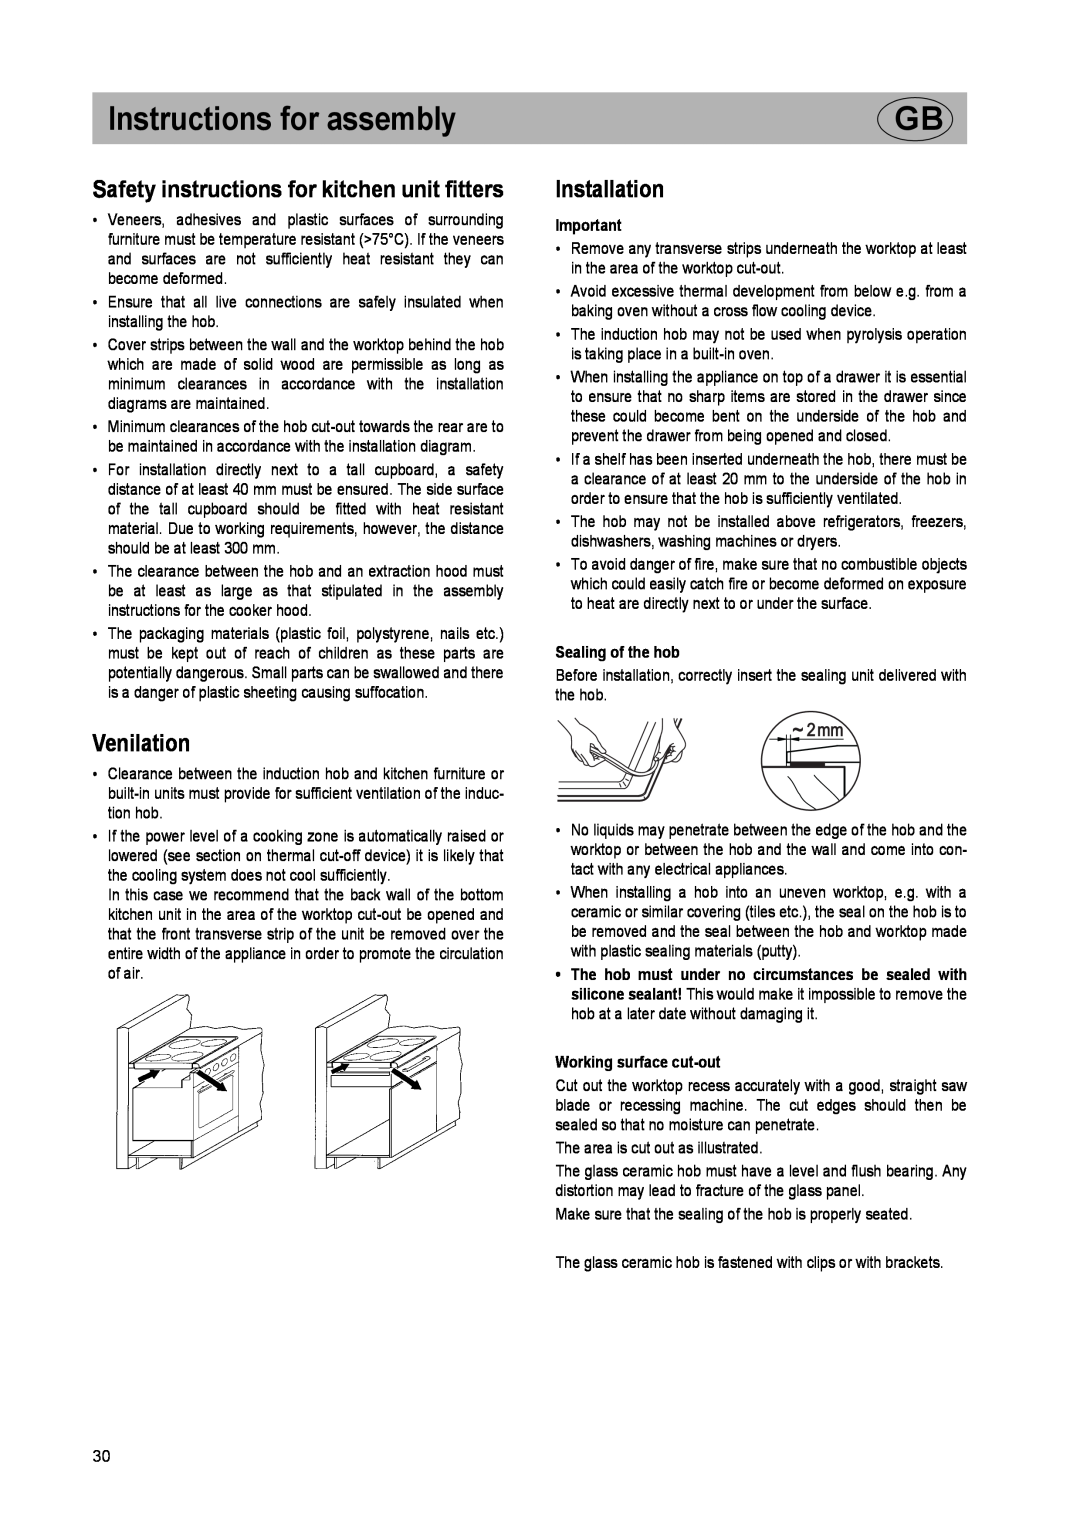 Smeg SE2642ID2 manual Instructions for assembly, Safety instructions for kitchen unit fitters, Venilation, Installation 